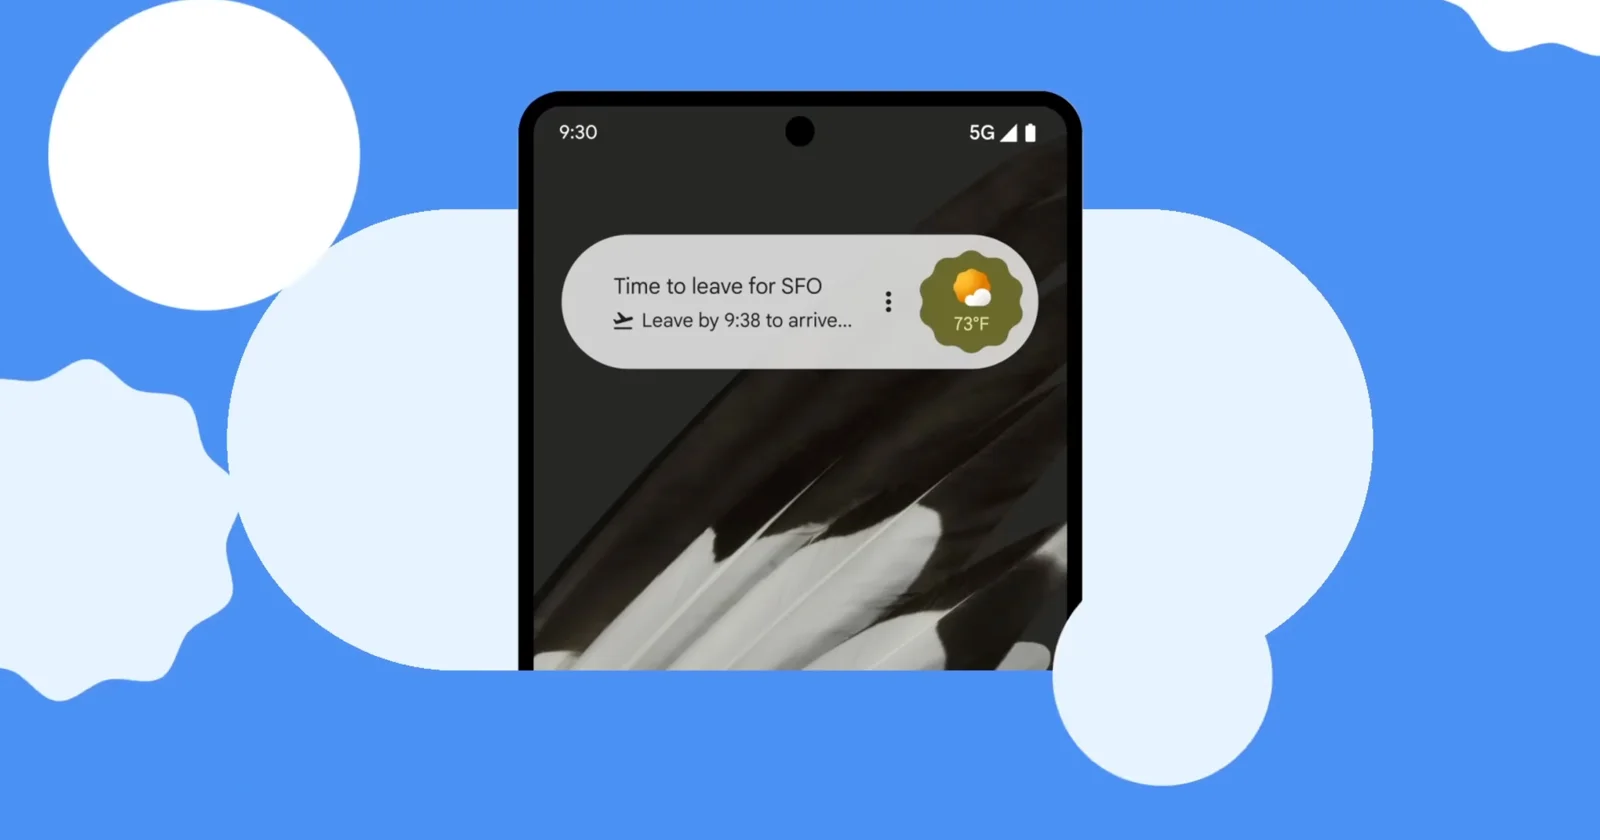 Google Pixel 'At a Glance' widget train information feature availability expanding globally